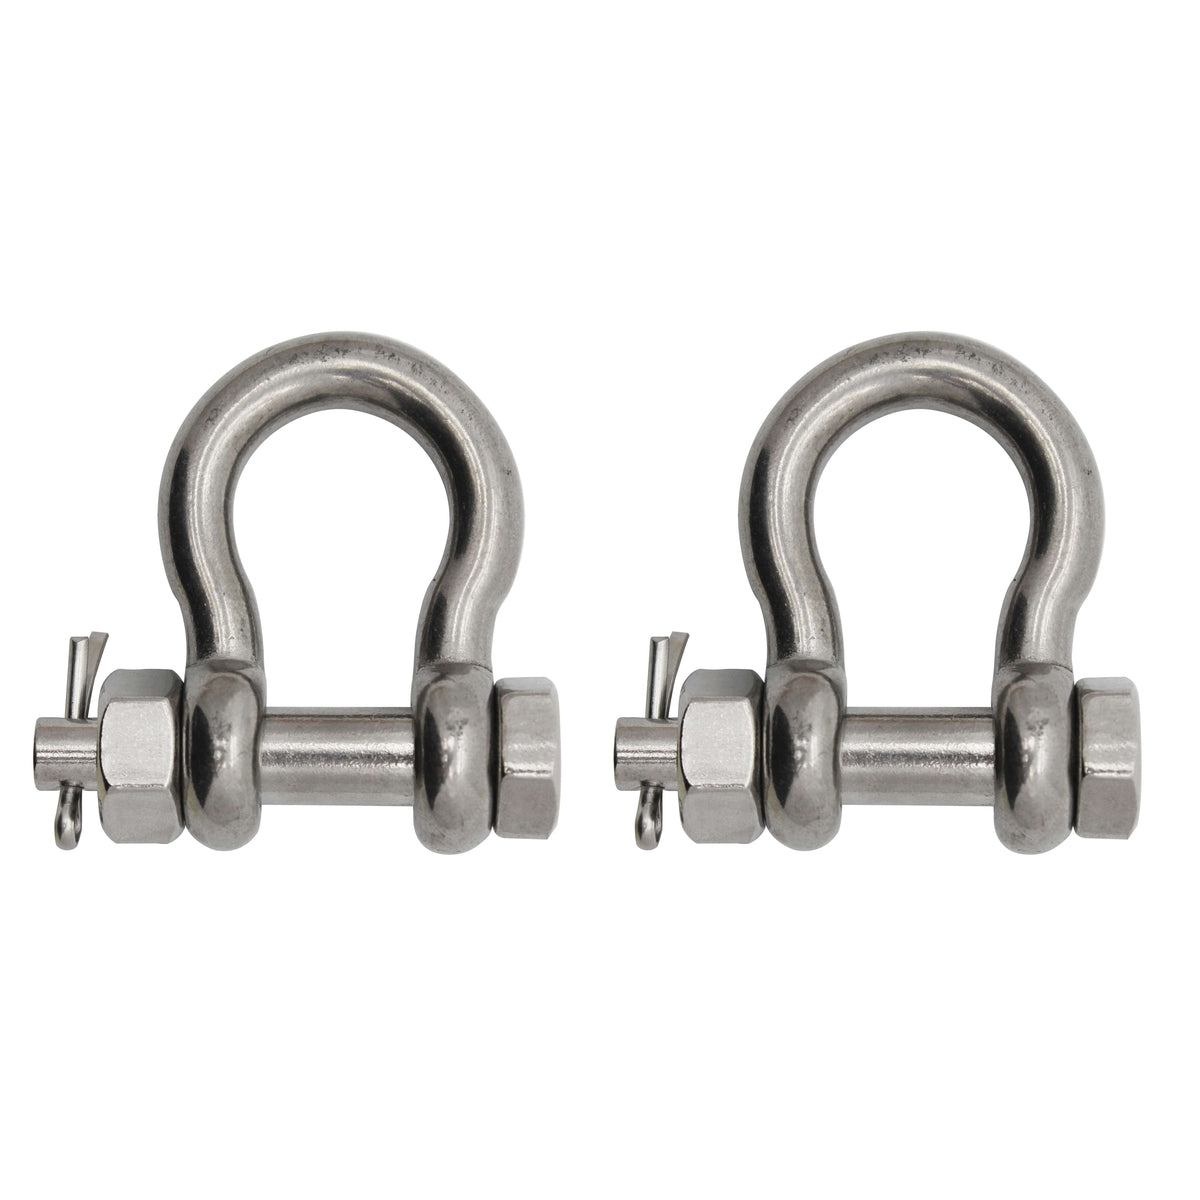 Extreme Max SS Bolt-Type Anchor Shackle 1/4" 2-pk #3006.8366.2